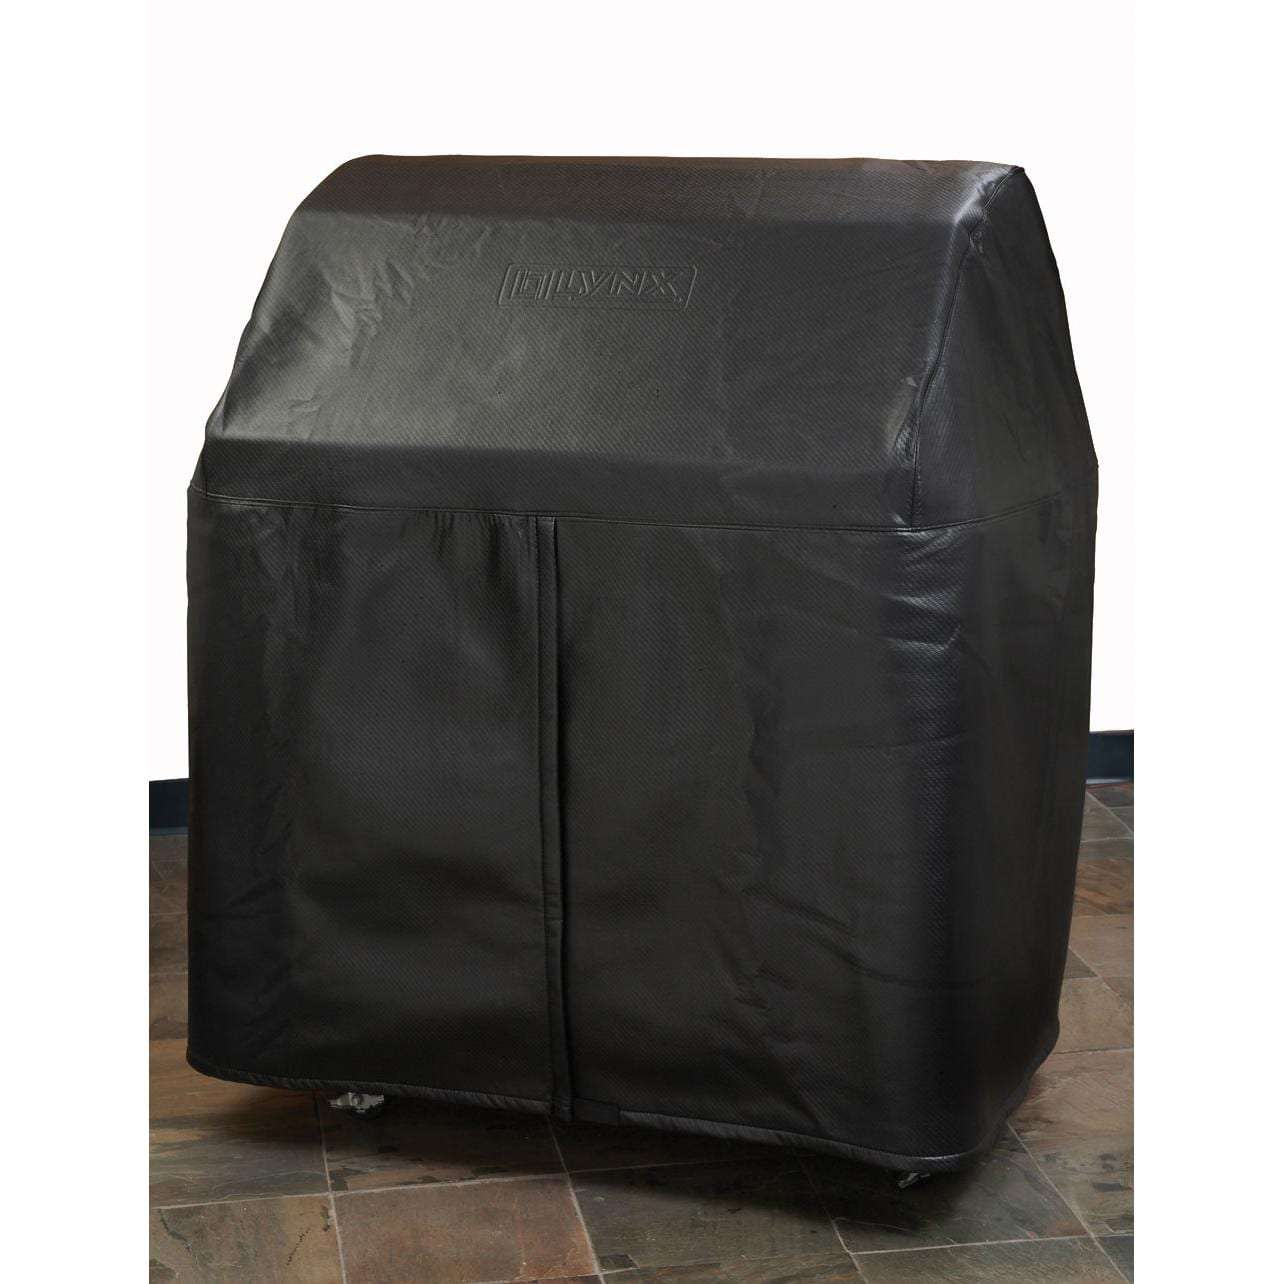 Lynx 36Inch Freestanding Professional Grill Cover CC36FCB